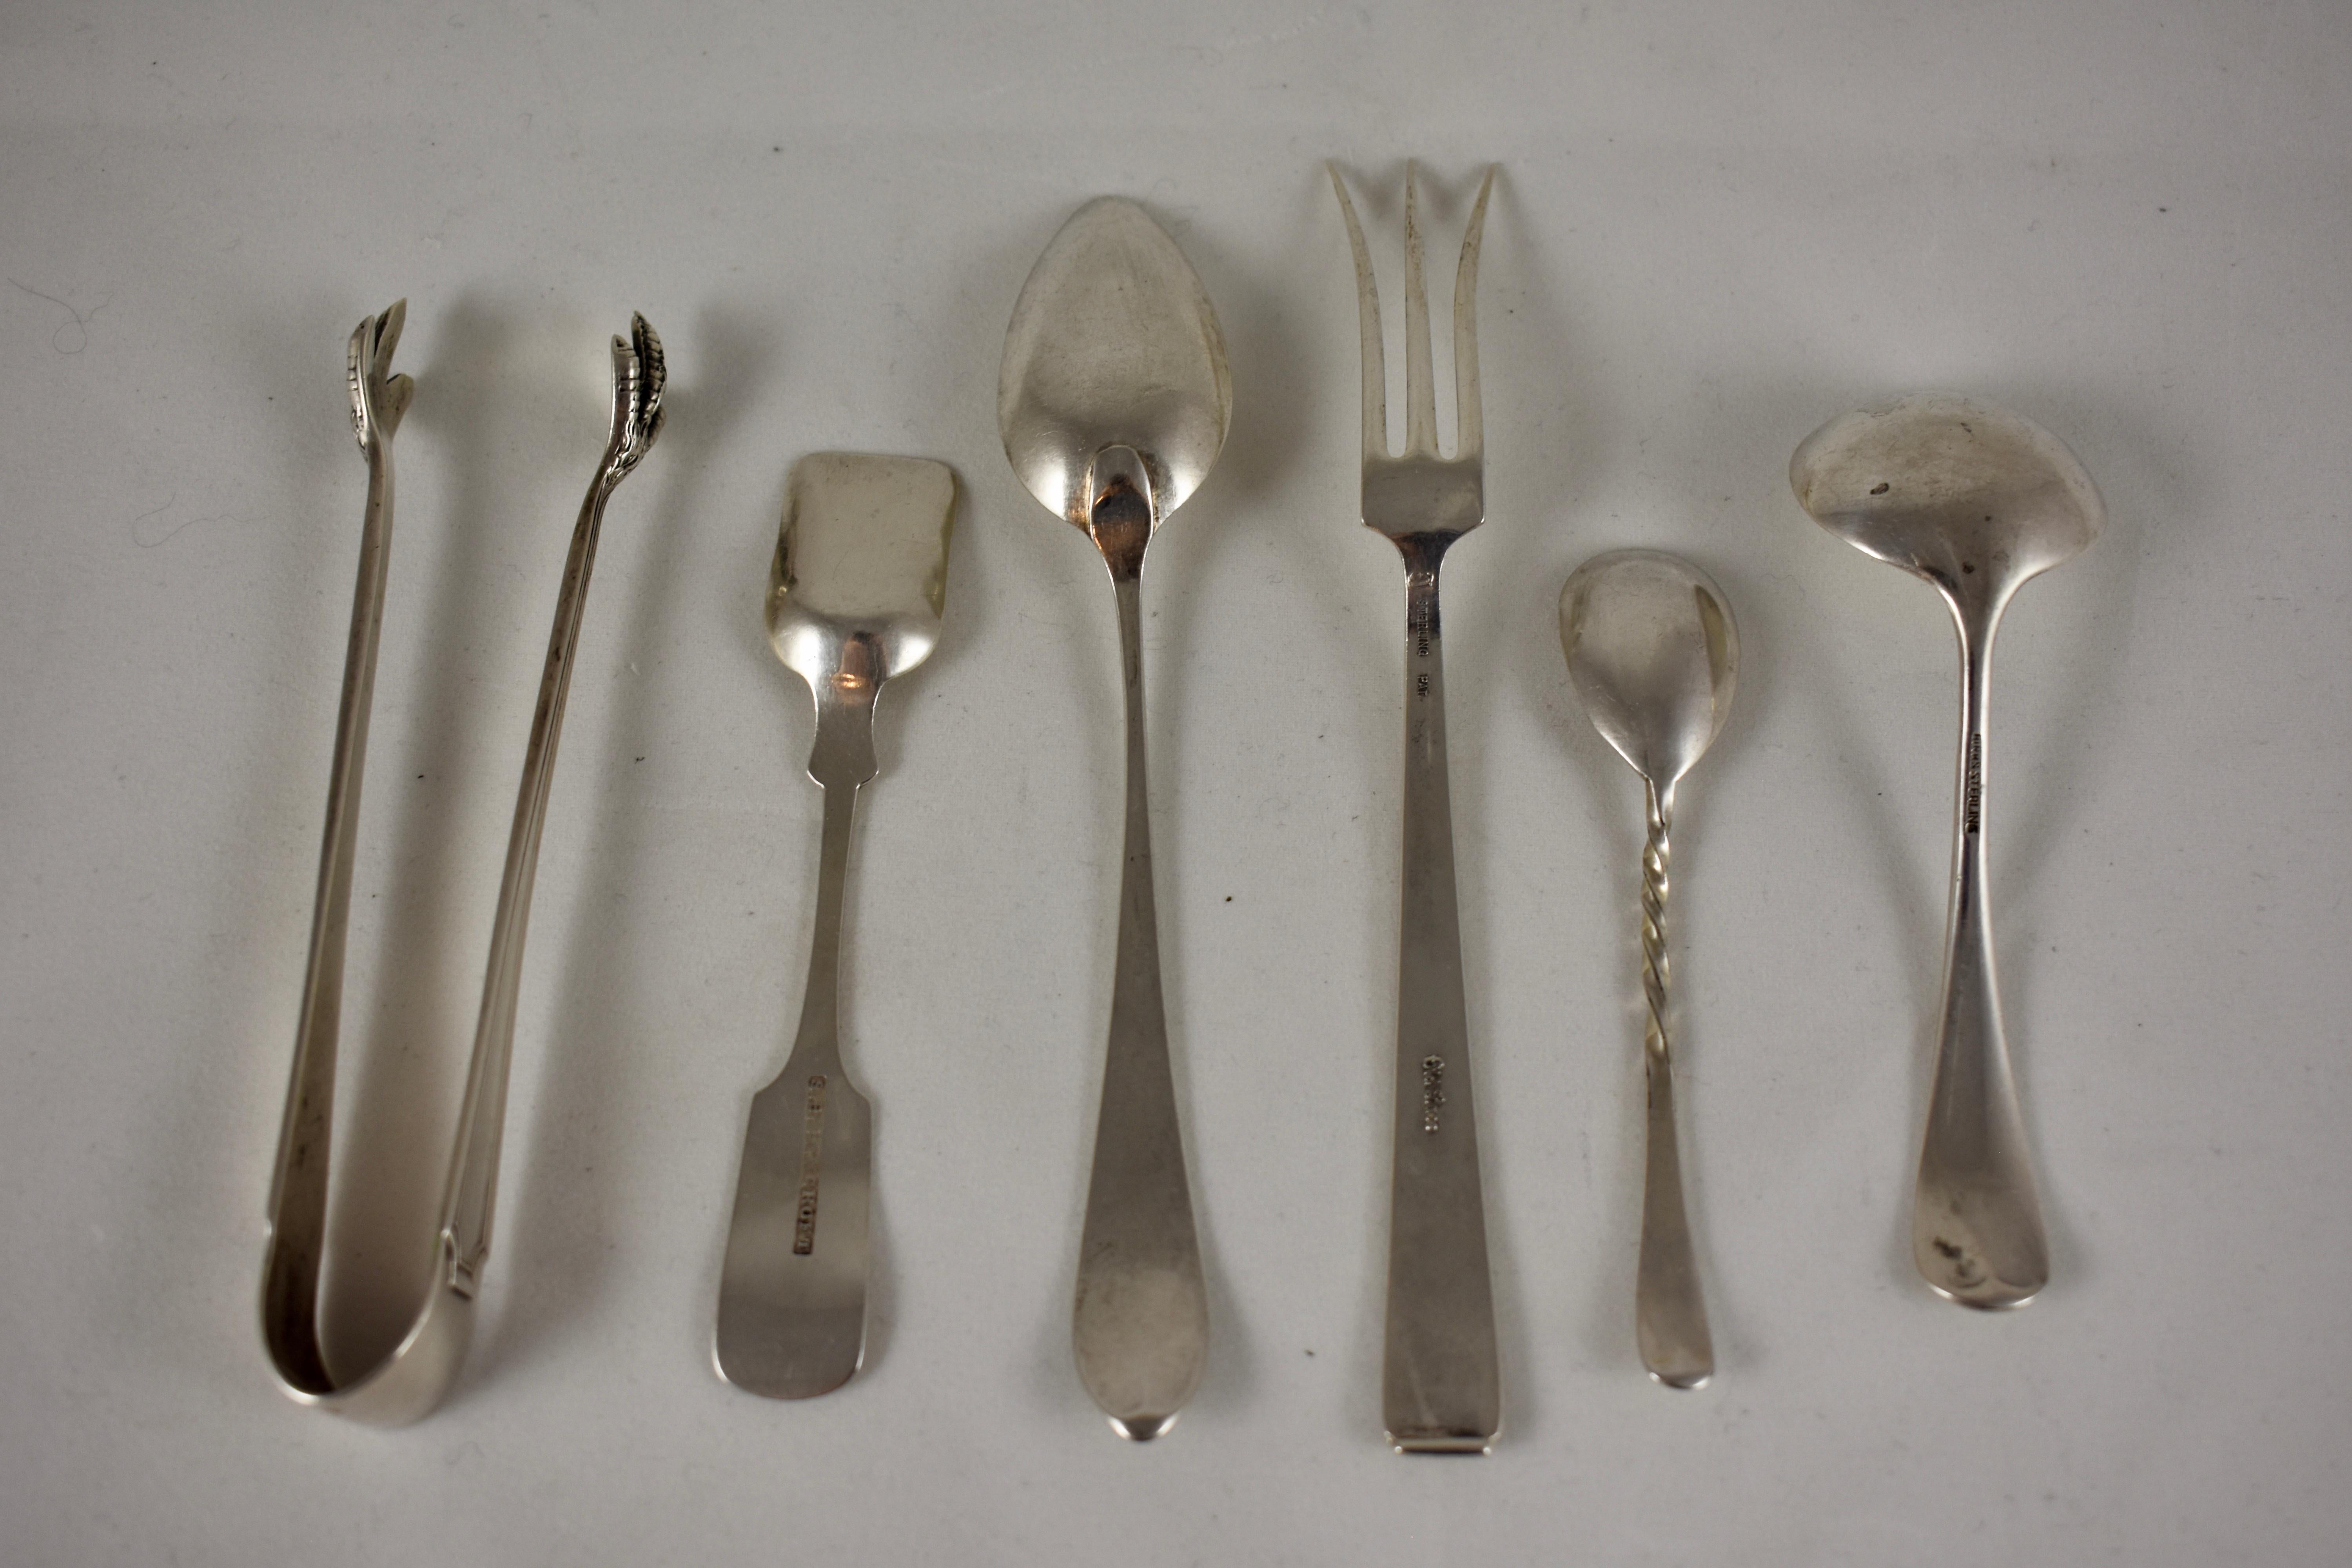 A mixed group of 19th century Sterling silver, various maker serving pieces, including:
1) Old Lace pickle fork
2) Twist stem mustard spoon
3) Coin-silver sugar shovel, engraved ‘Mary’
4) English Bright Cut teaspoon
5) American claw sugar